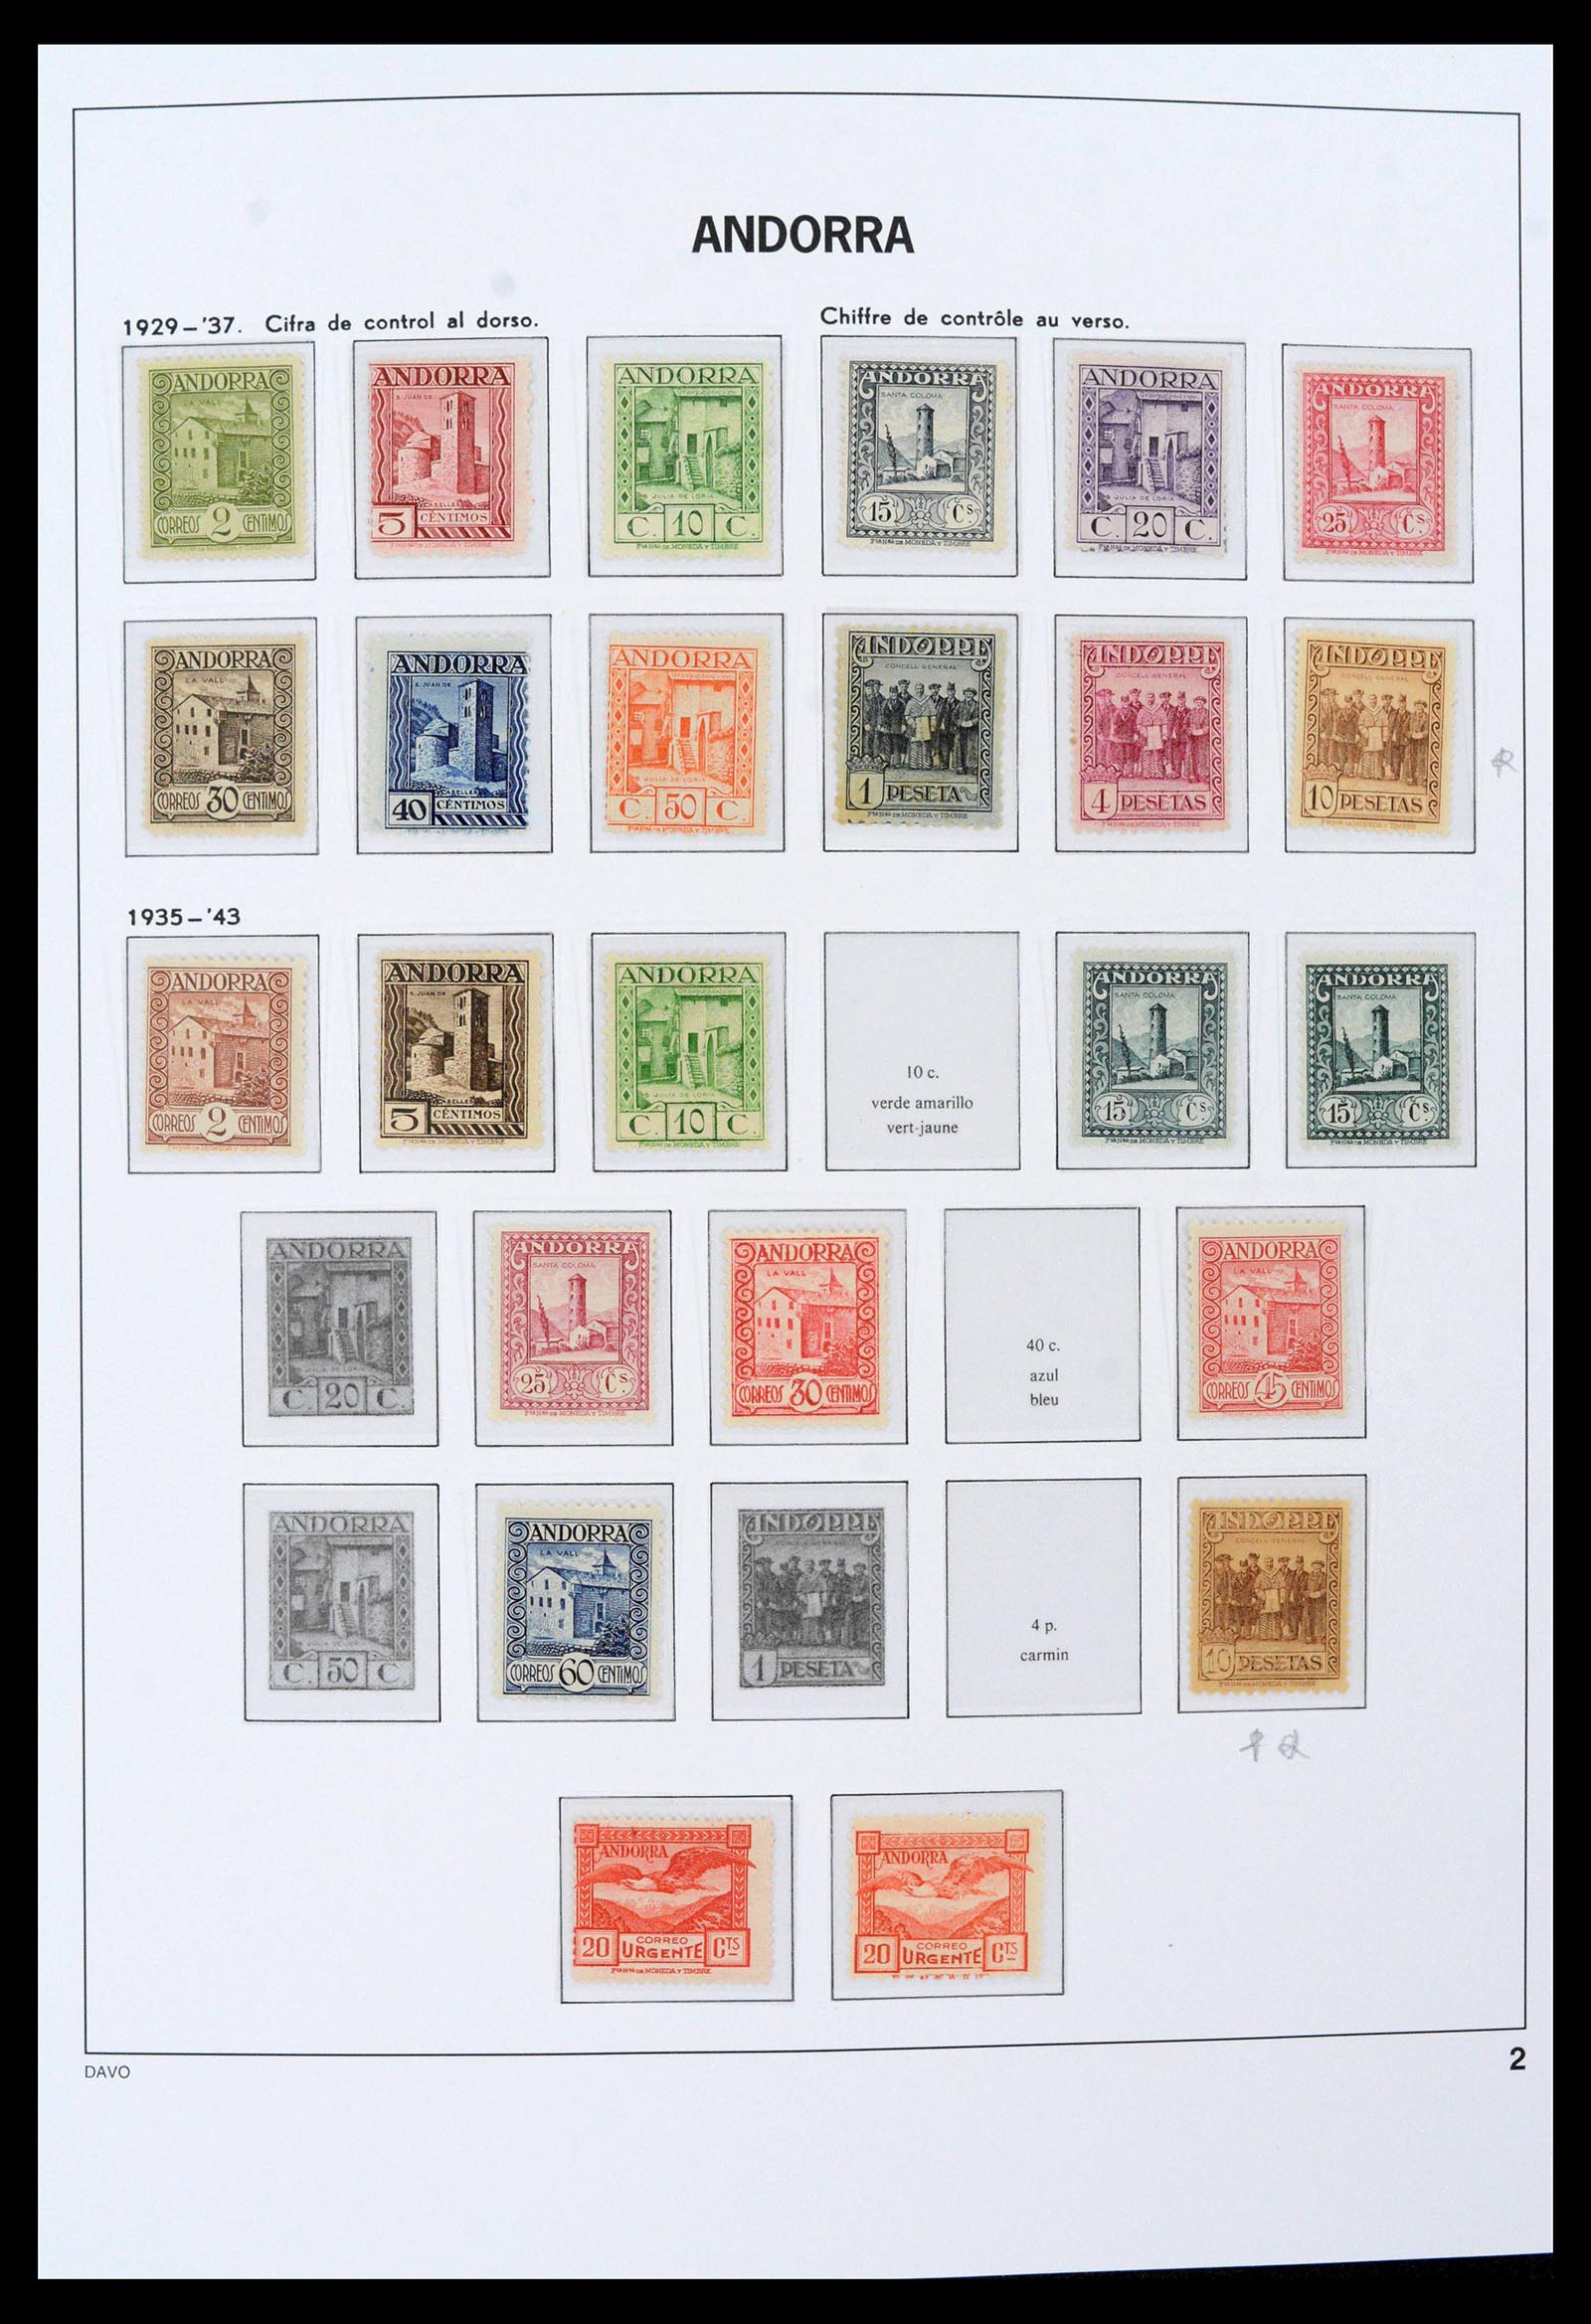 39388 0065 - Stamp collection 39388 Spanish Andorra 1928-2019!